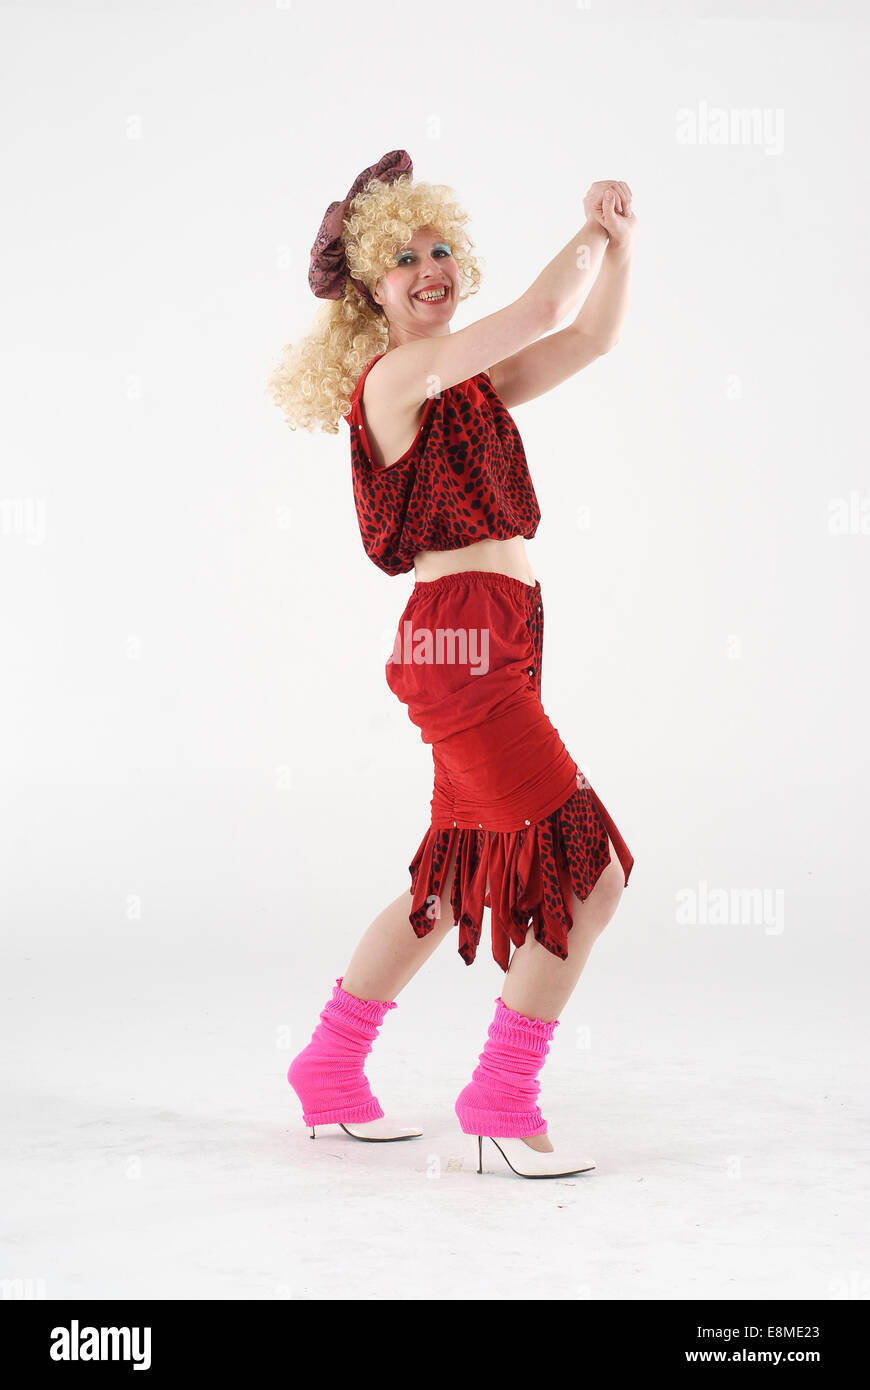 woman in fancy dress comedy costume in 1980s disco fashion and crazy outfit Stock Photo